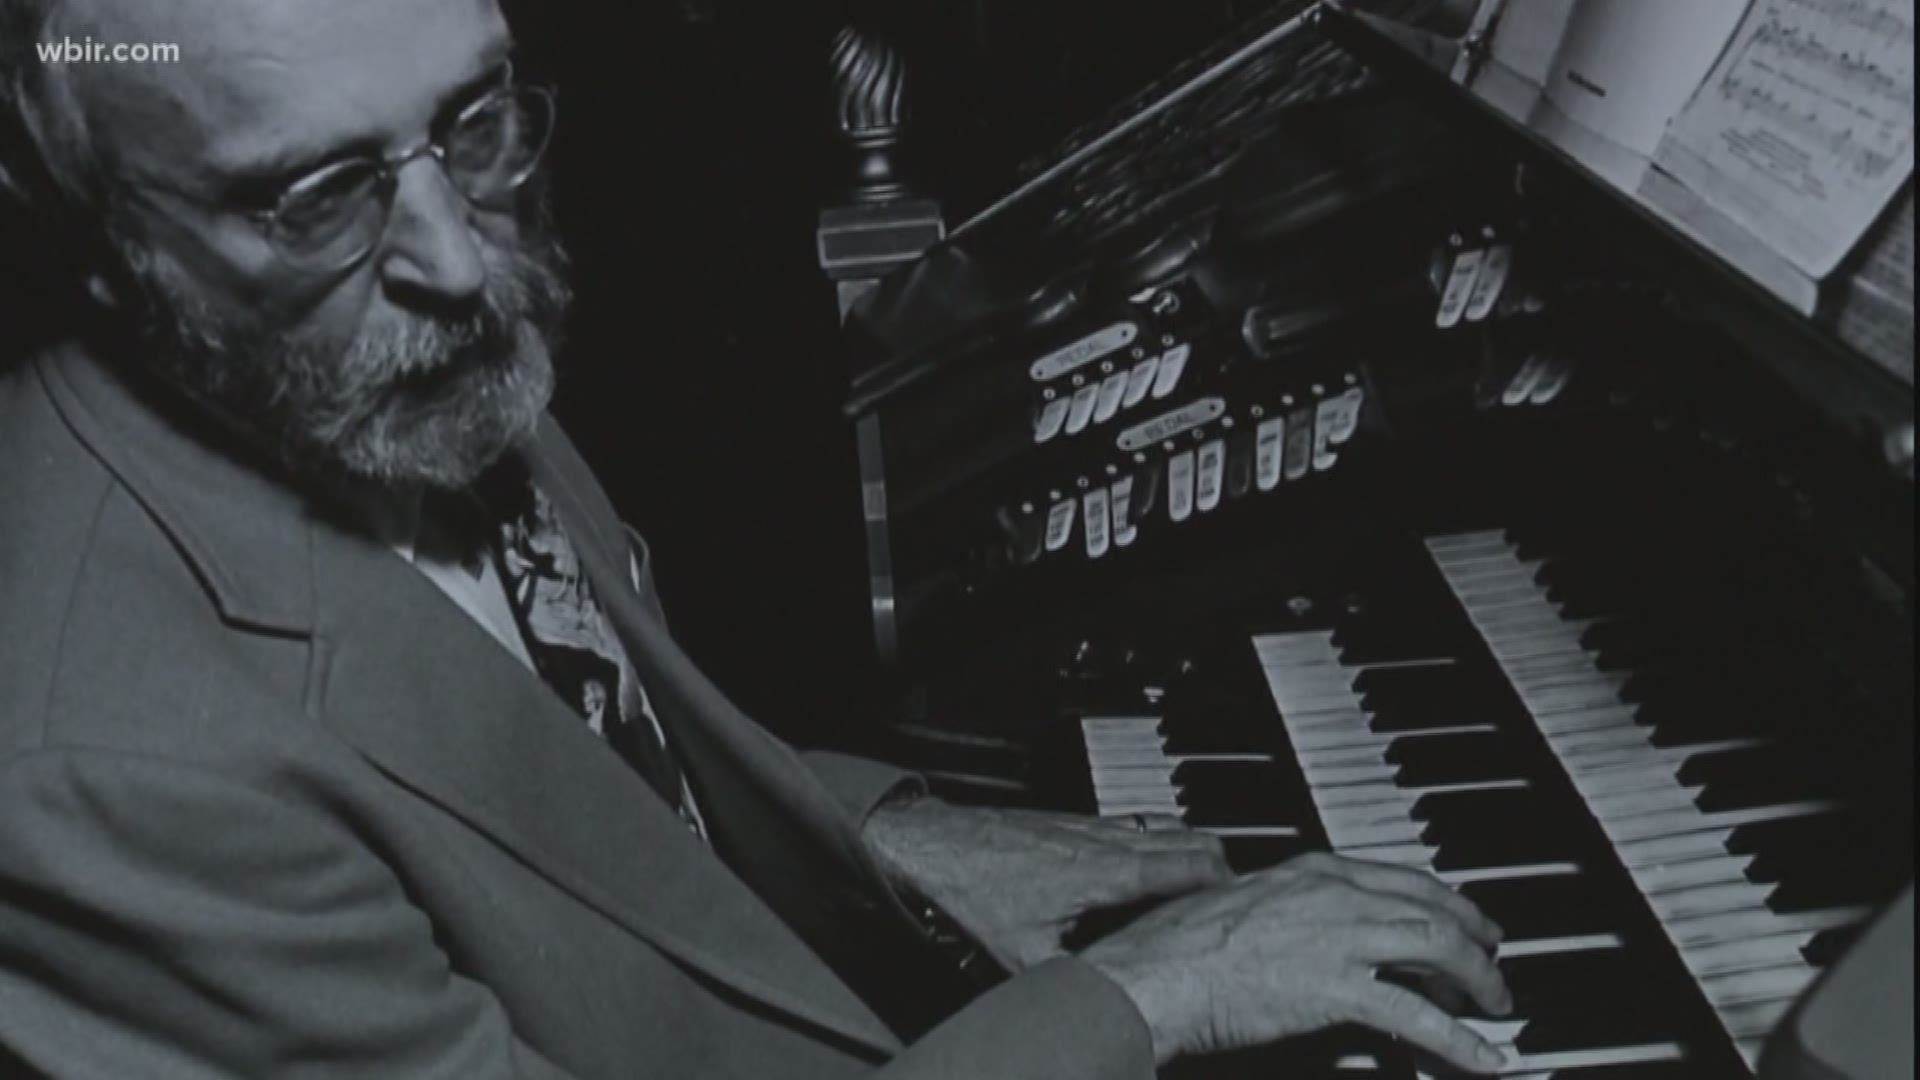 The former UTK chancellor started playing the pipe organ in the Tennessee Theatre in 1979